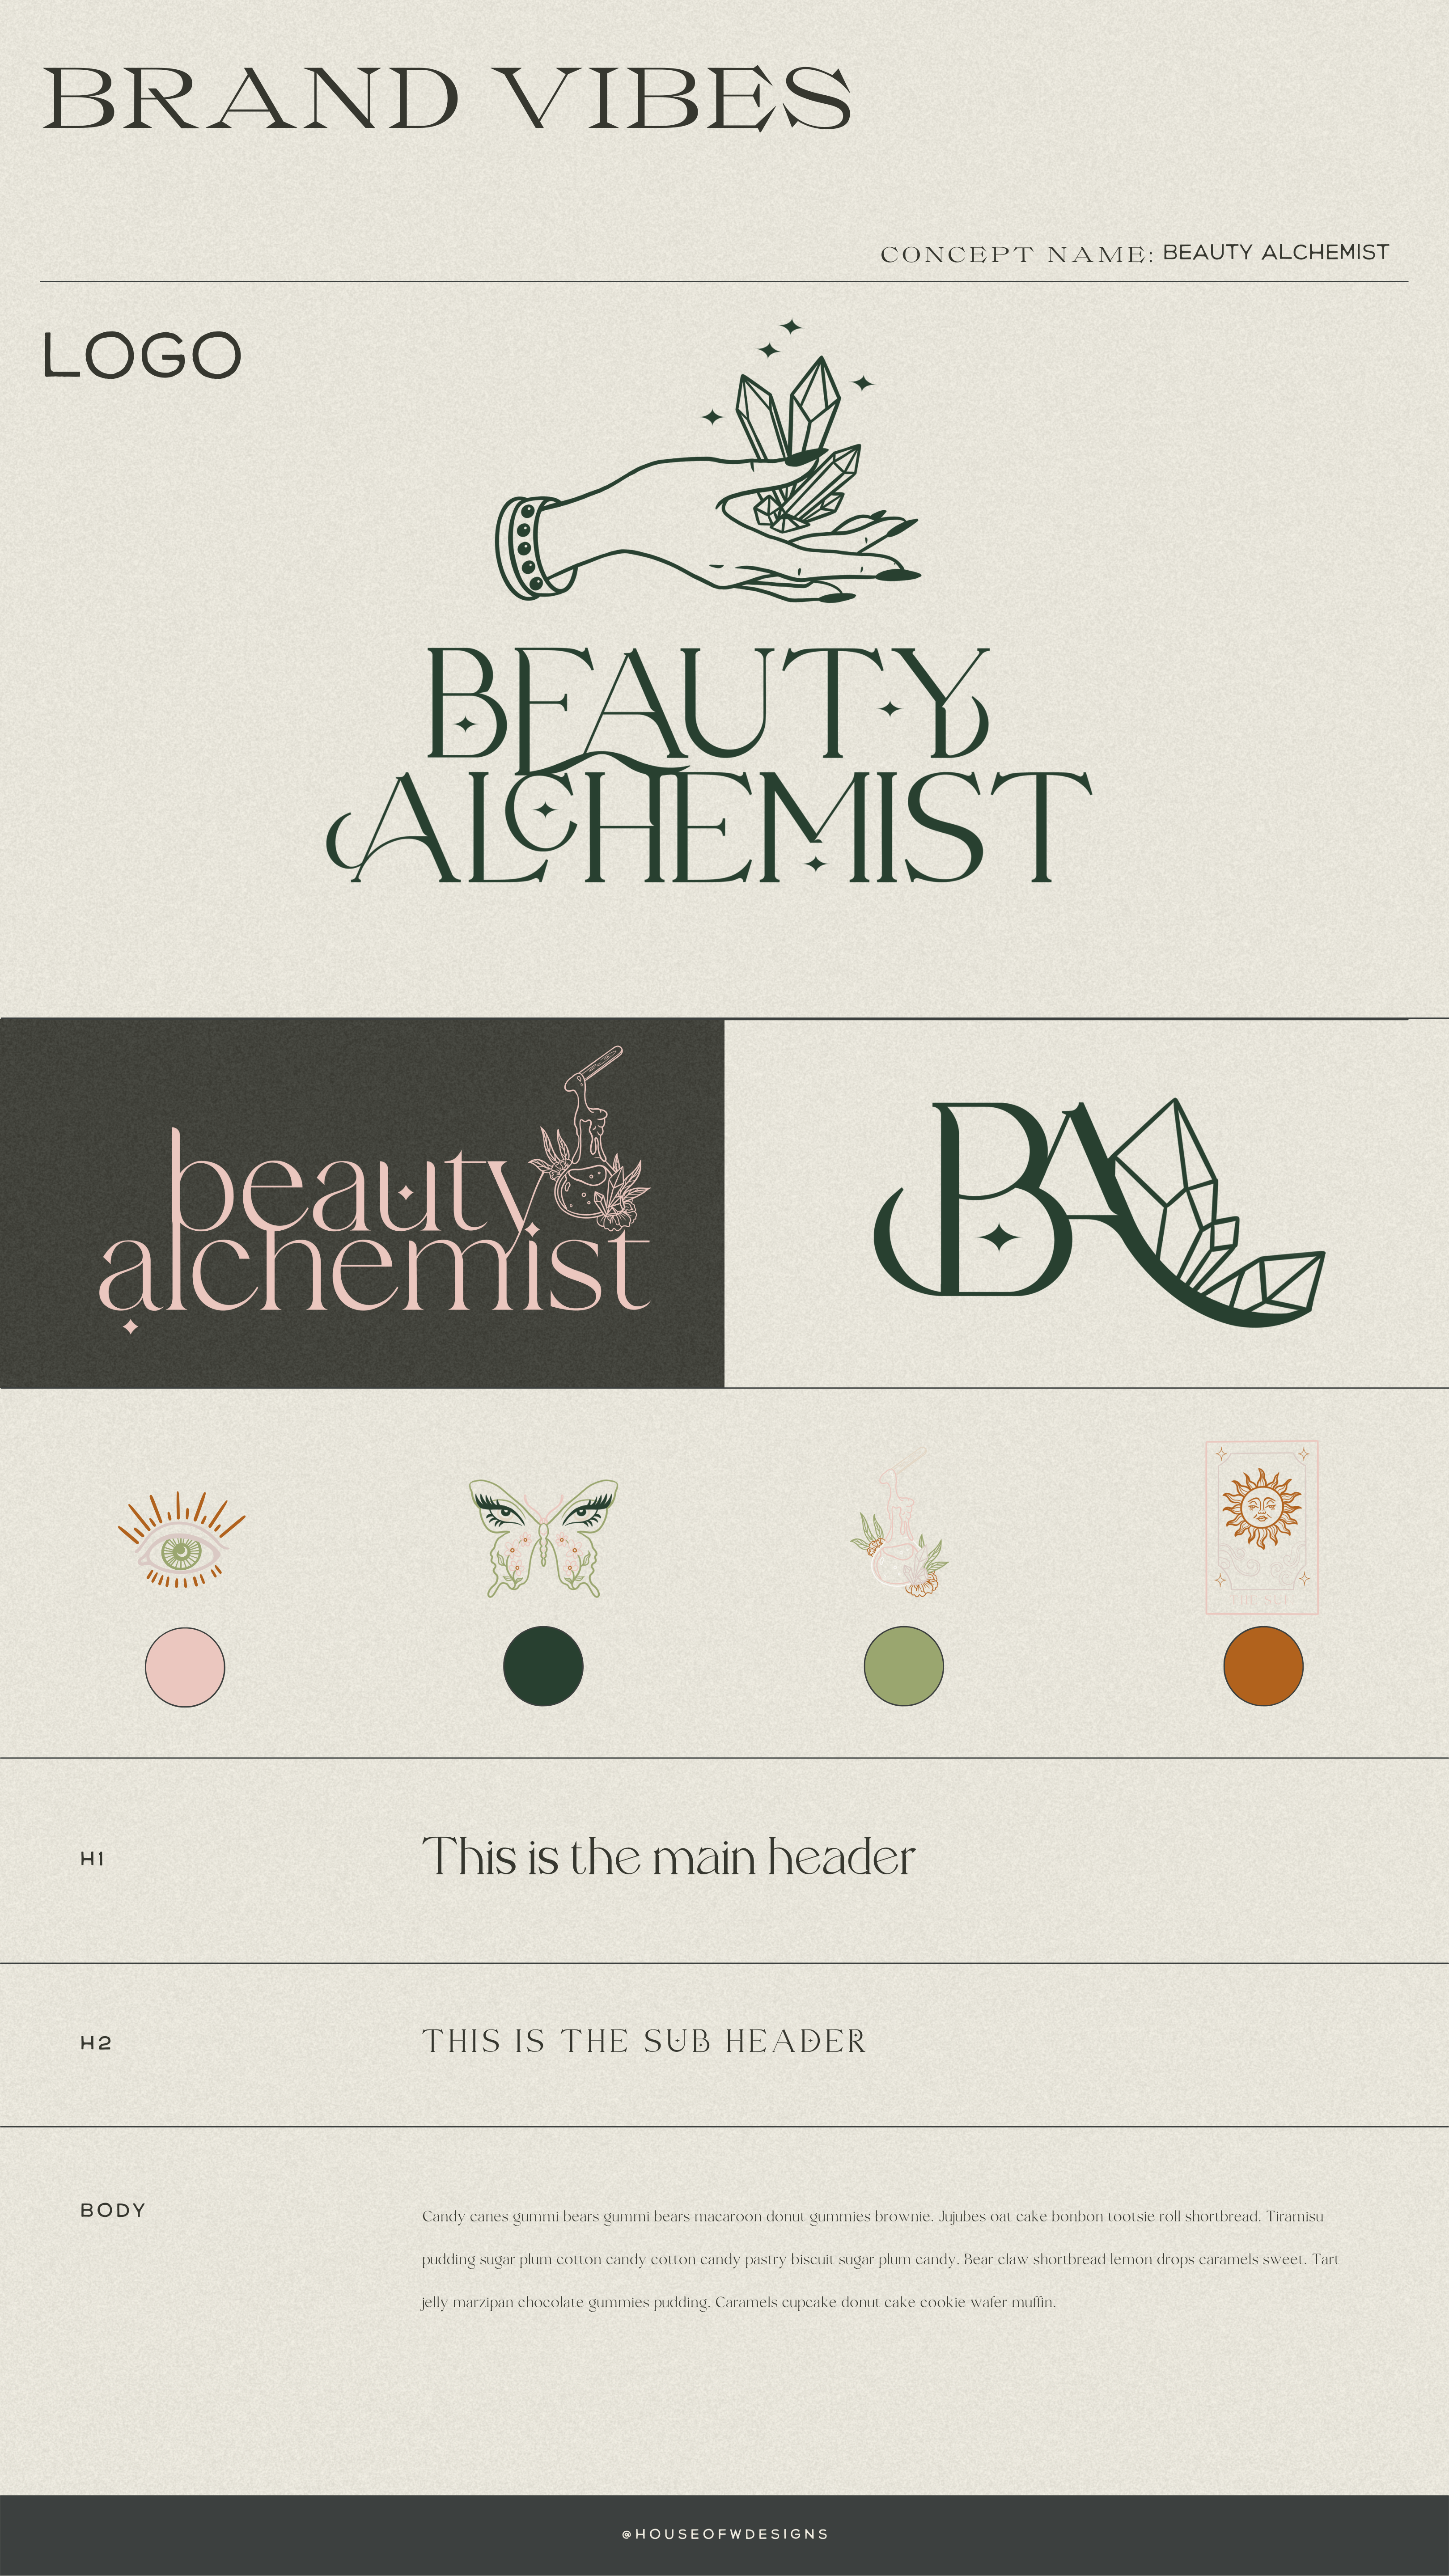 Brand board for a mystical esthetician brand and web design by House of W, a brand and web designer for photographers and creatives.